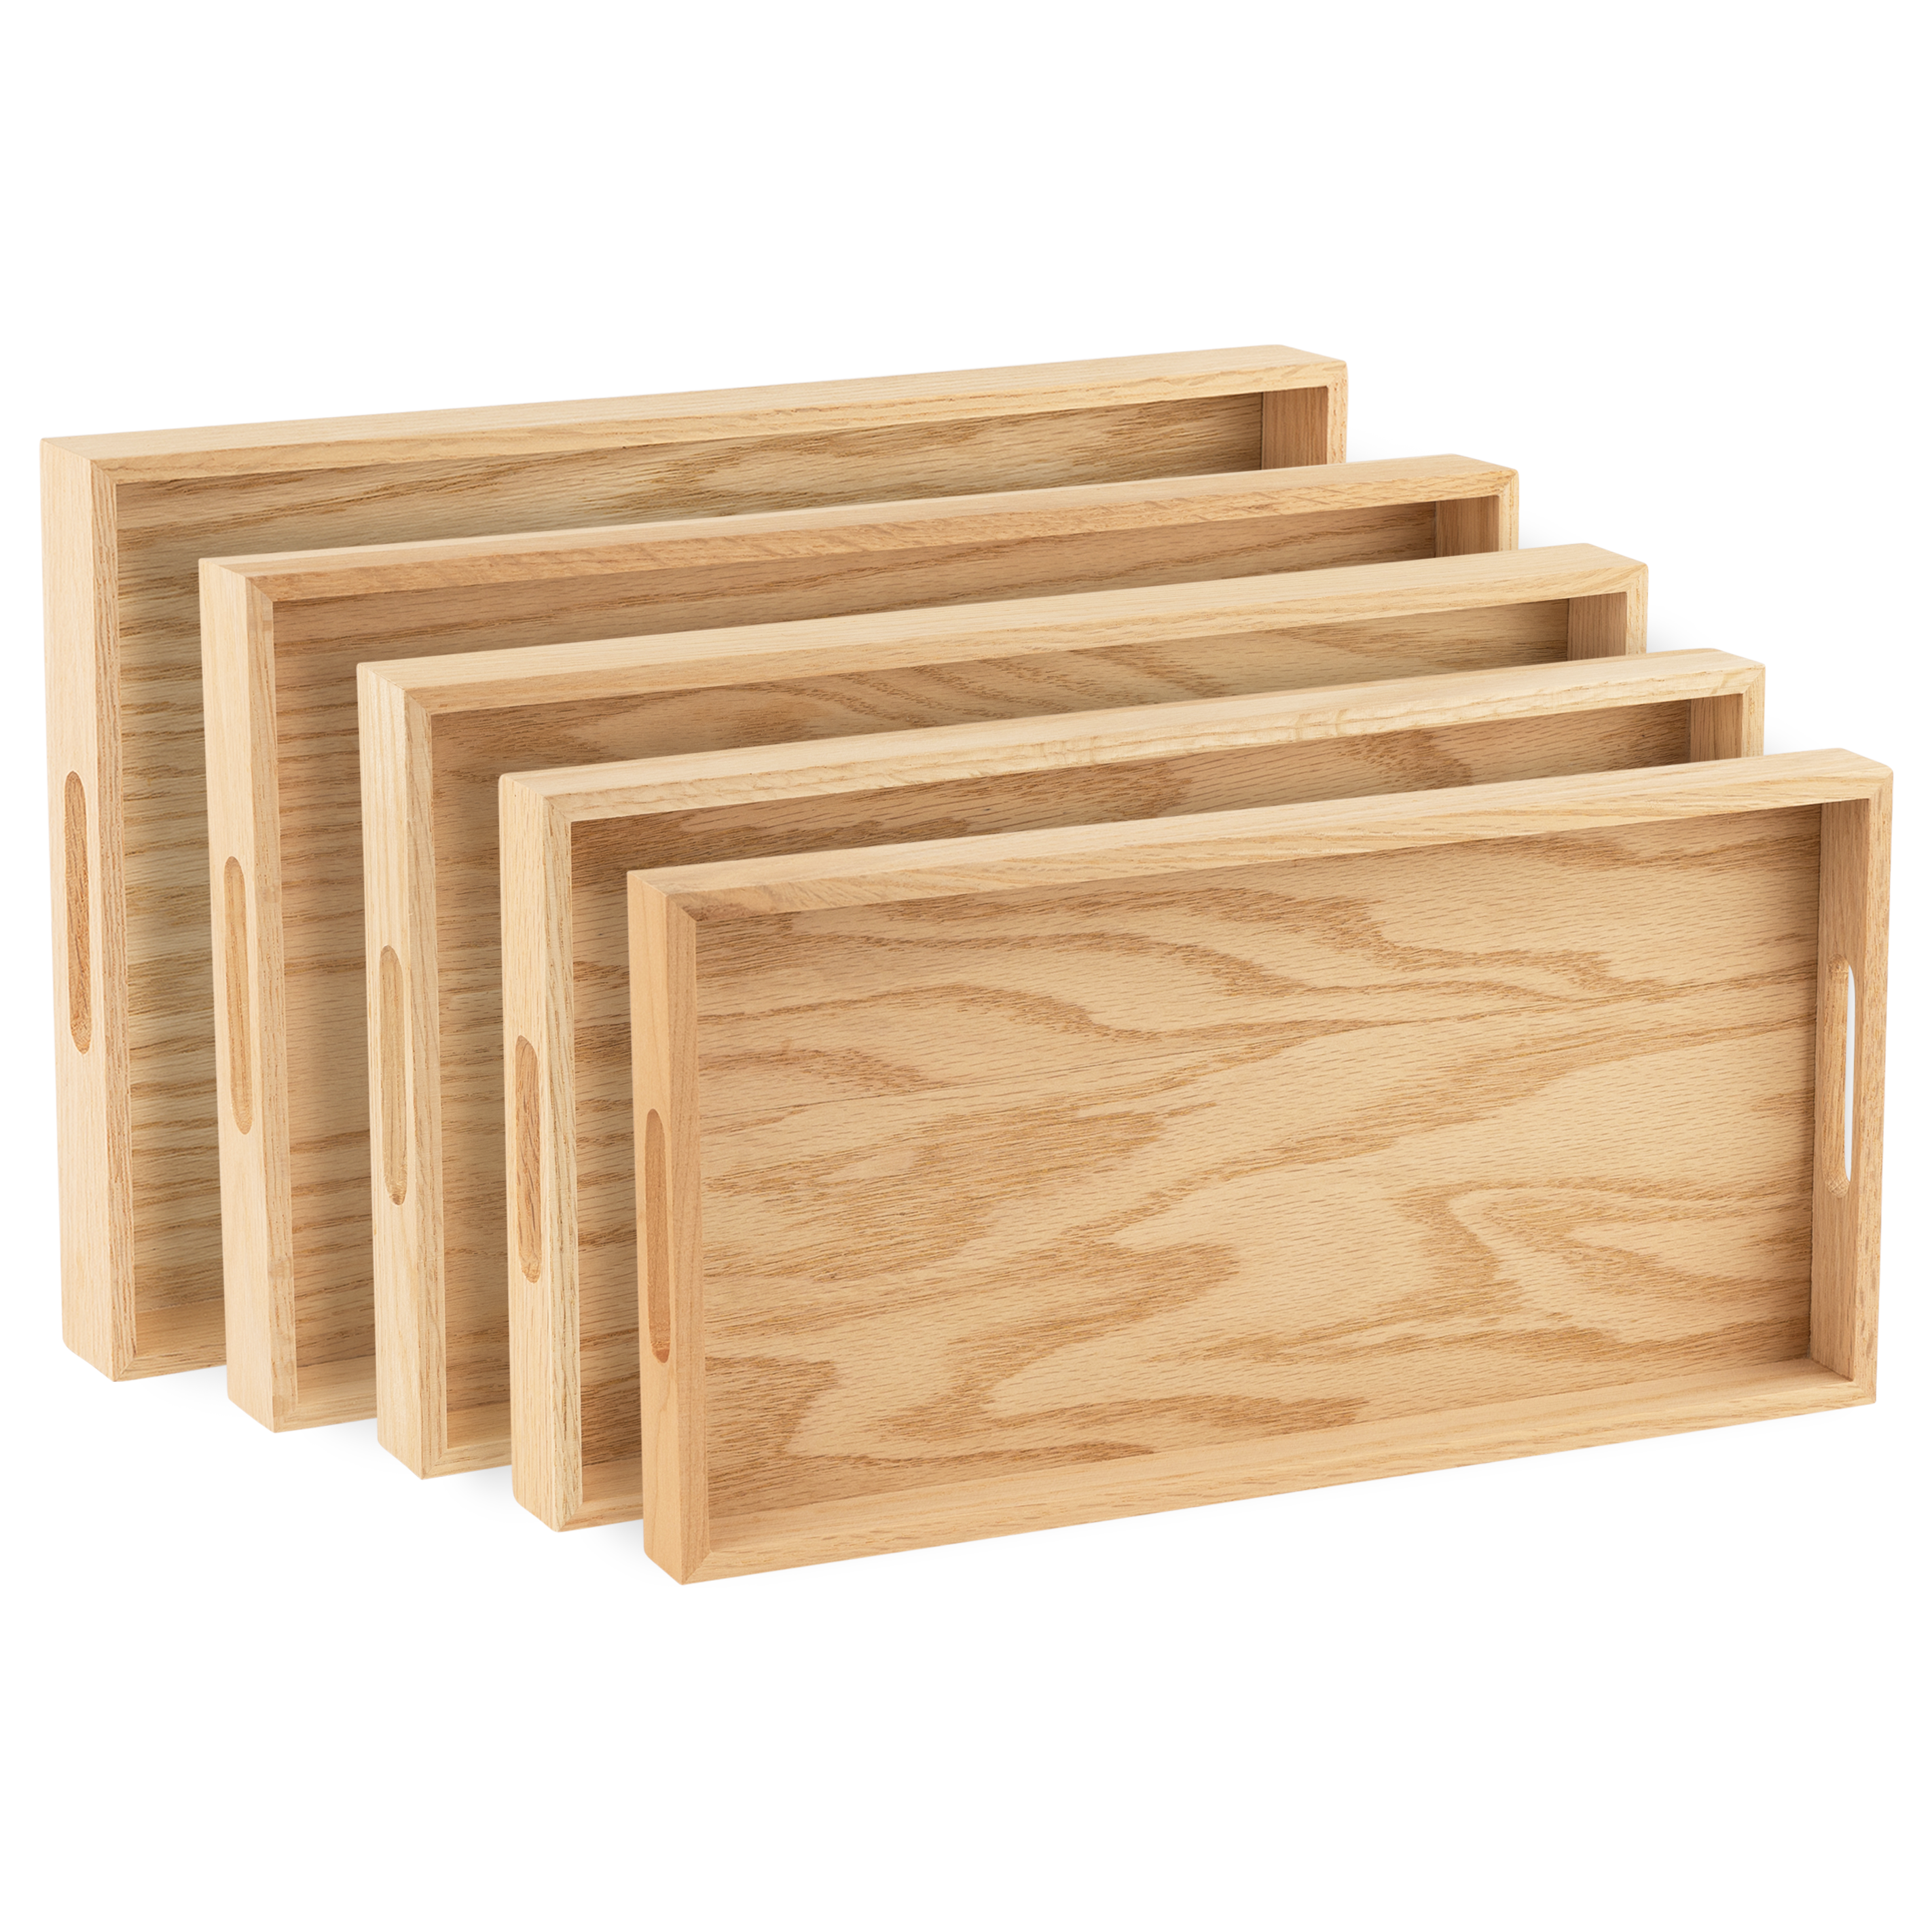  Montessori Wooden Trays with Handles, 3 Pack Small